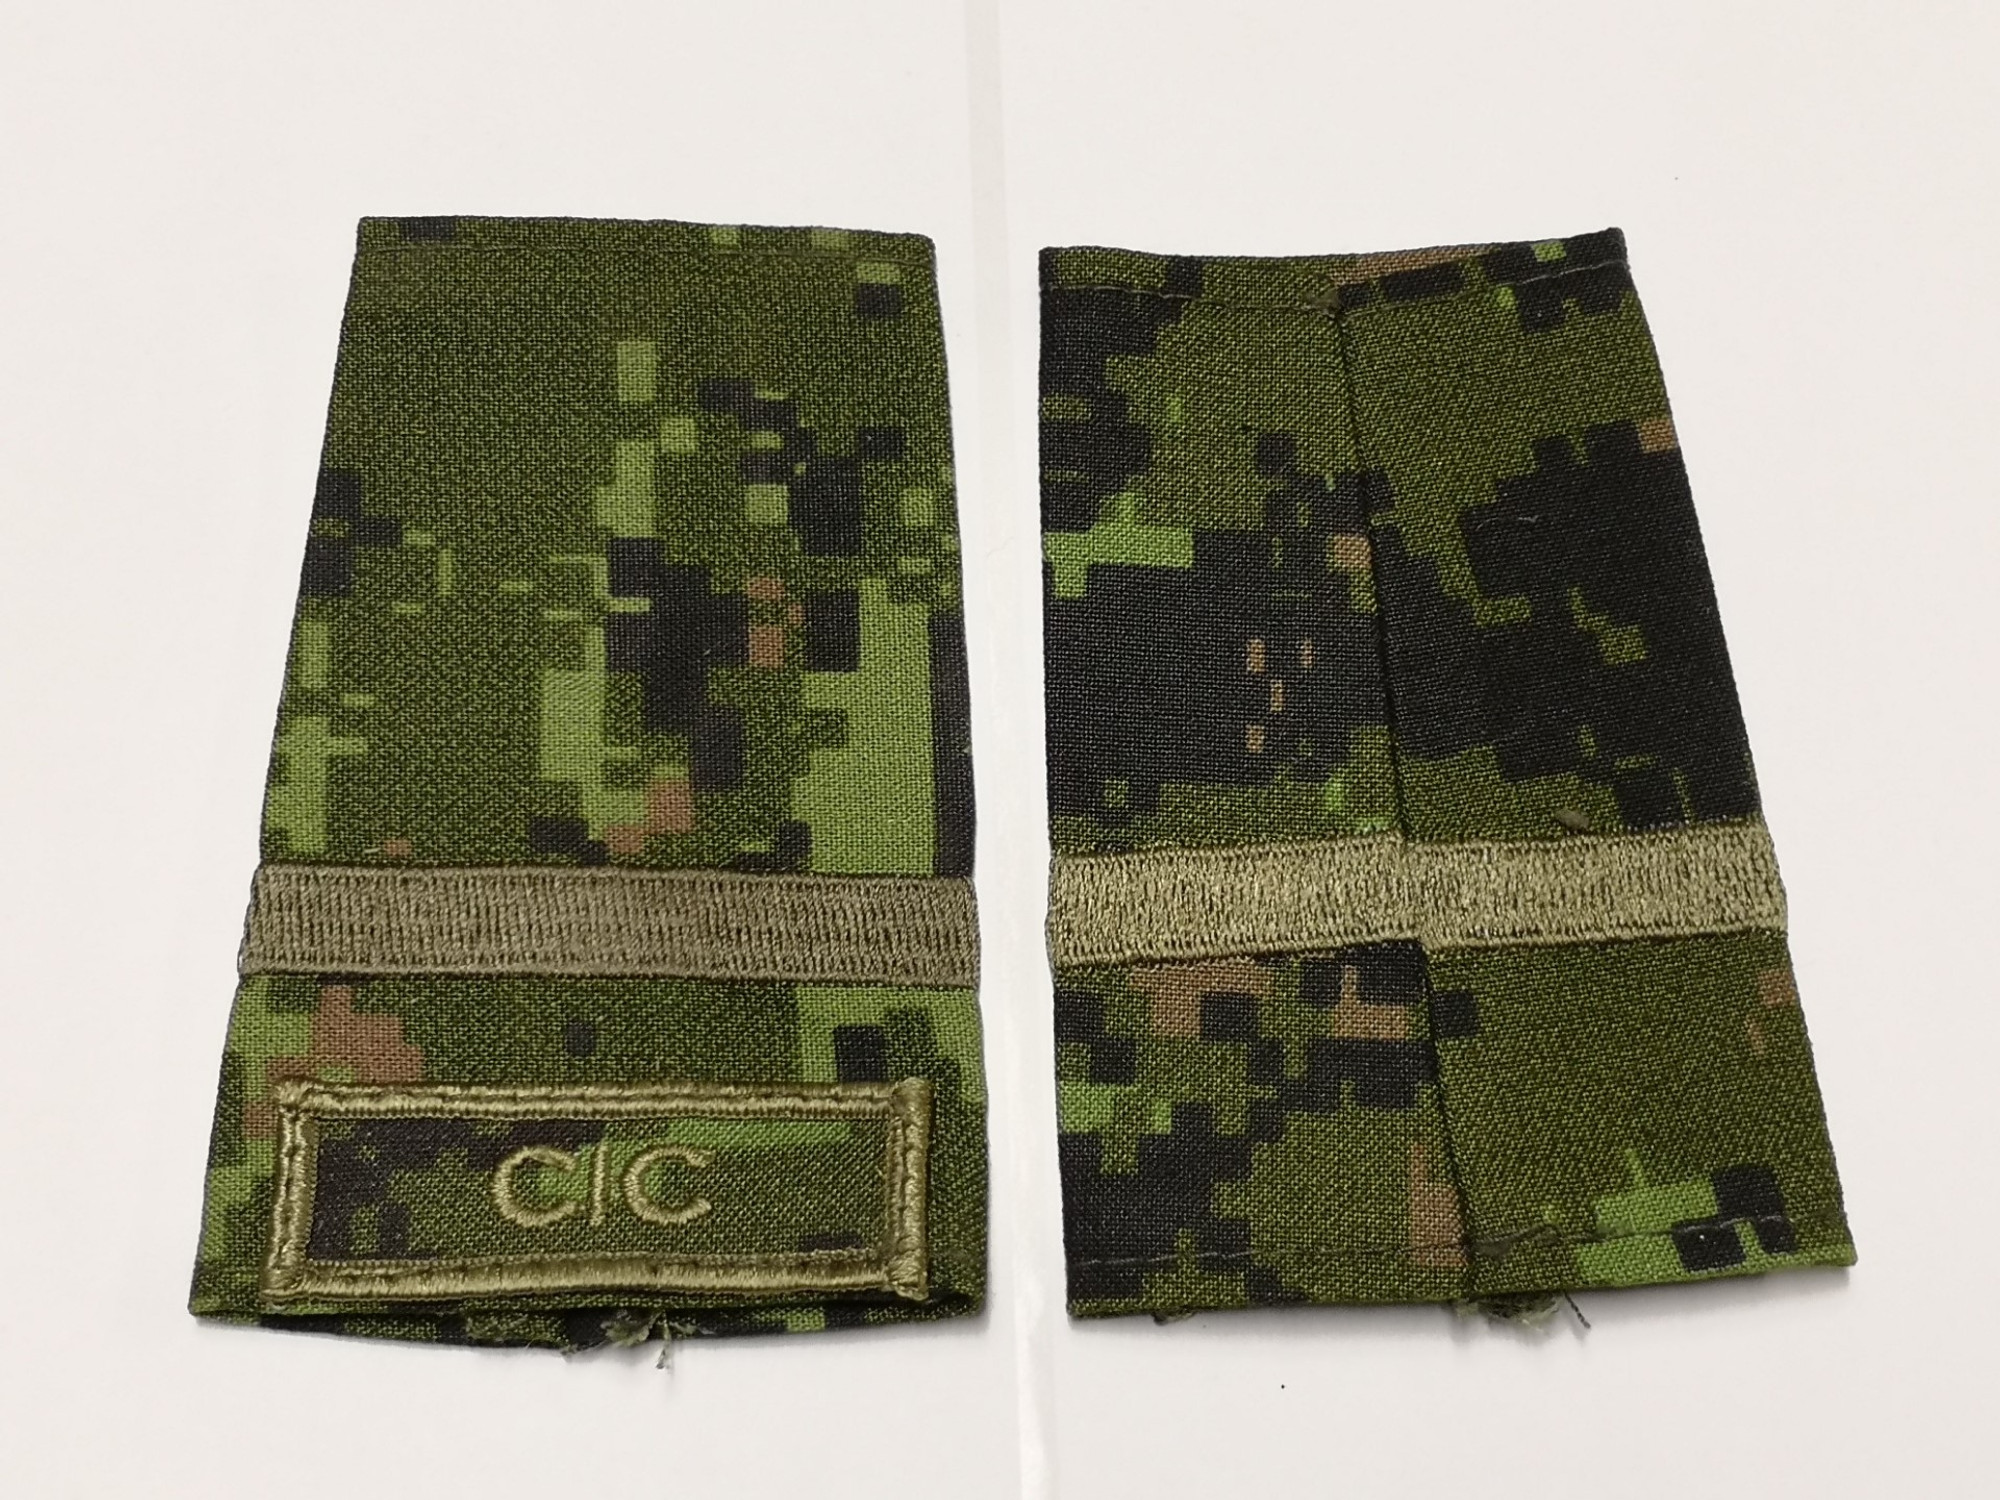 Canadian Armed Forces Cadpat Rank Epaulets CIC - 2nd Lieutenant